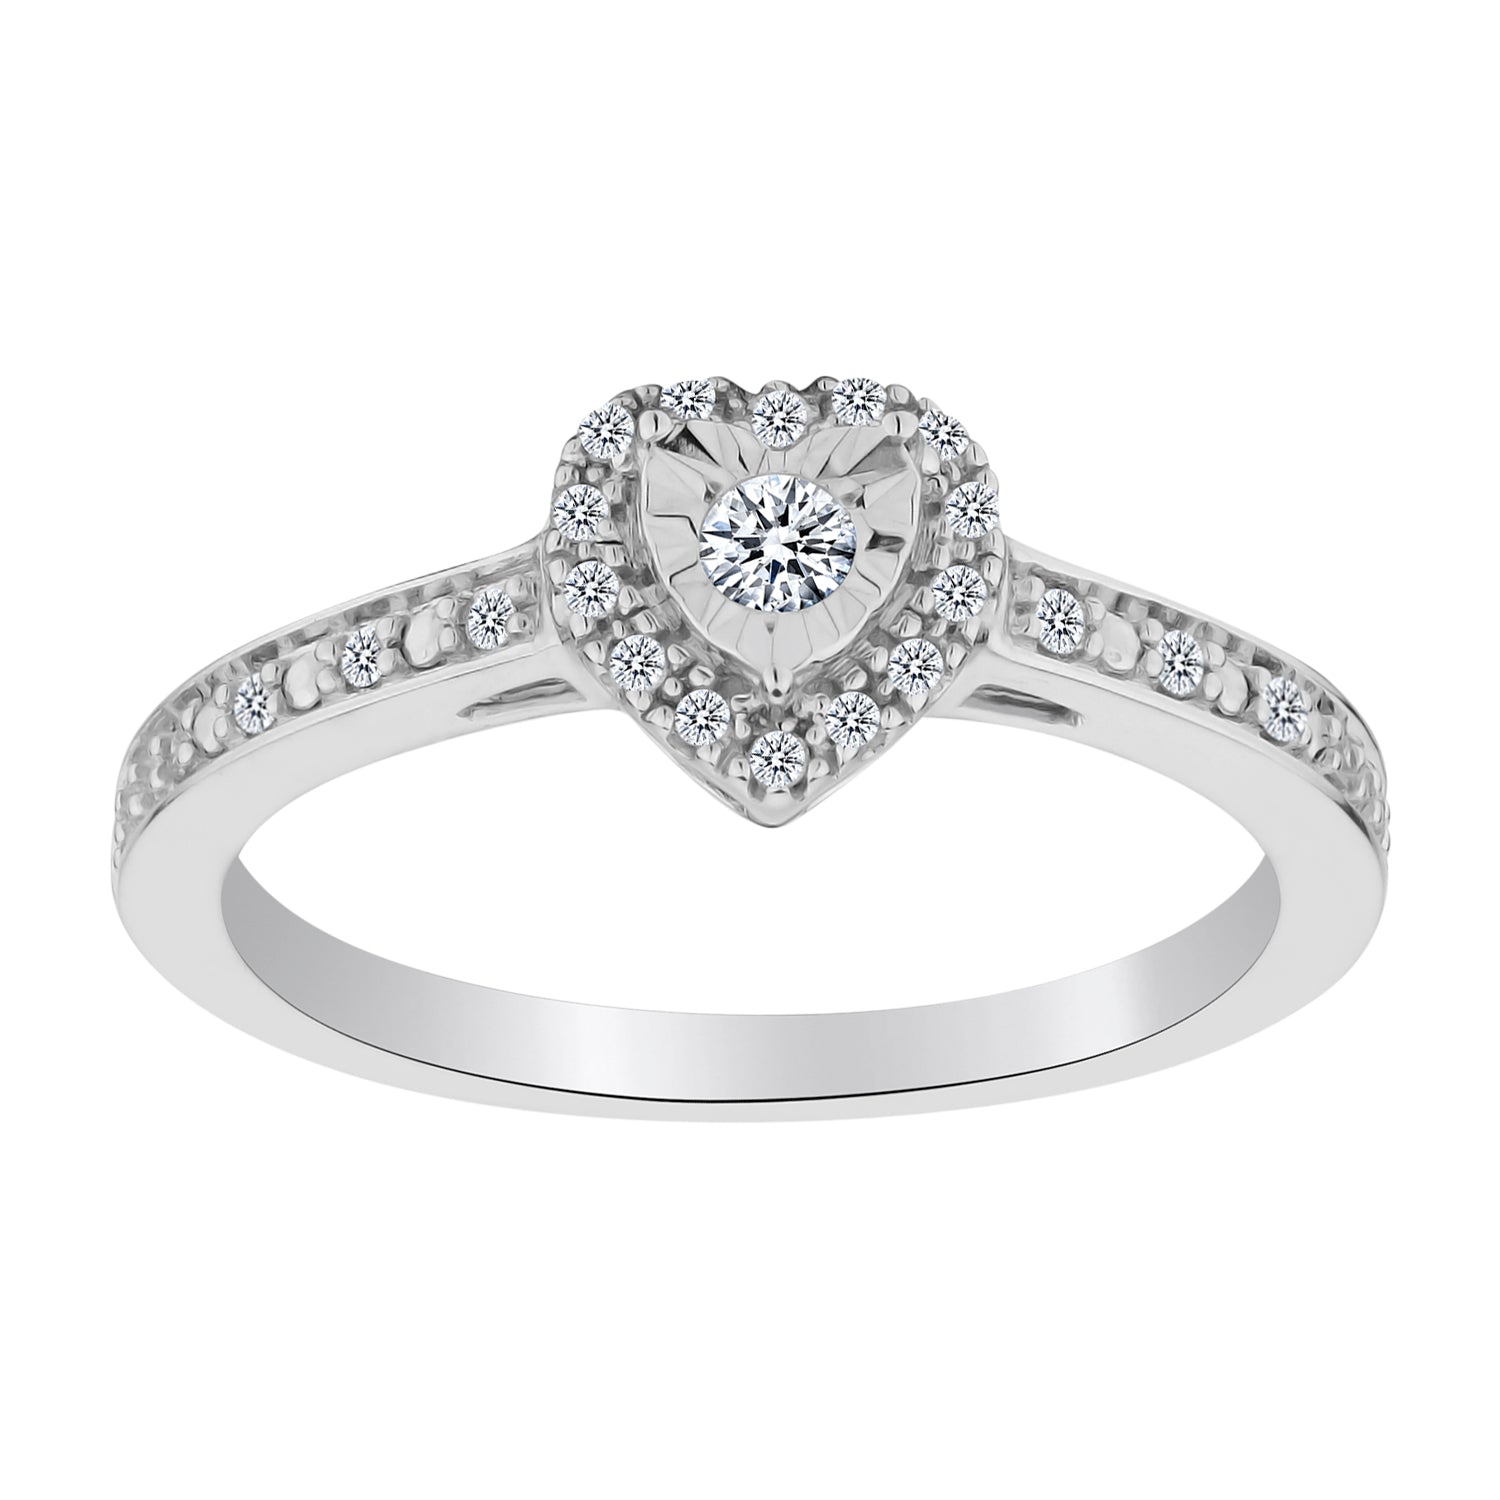 .15 CARAT DIAMOND "HEART" RING, 10kt WHITE GOLD. Fashion Rings- Griffin Jewellery Designs